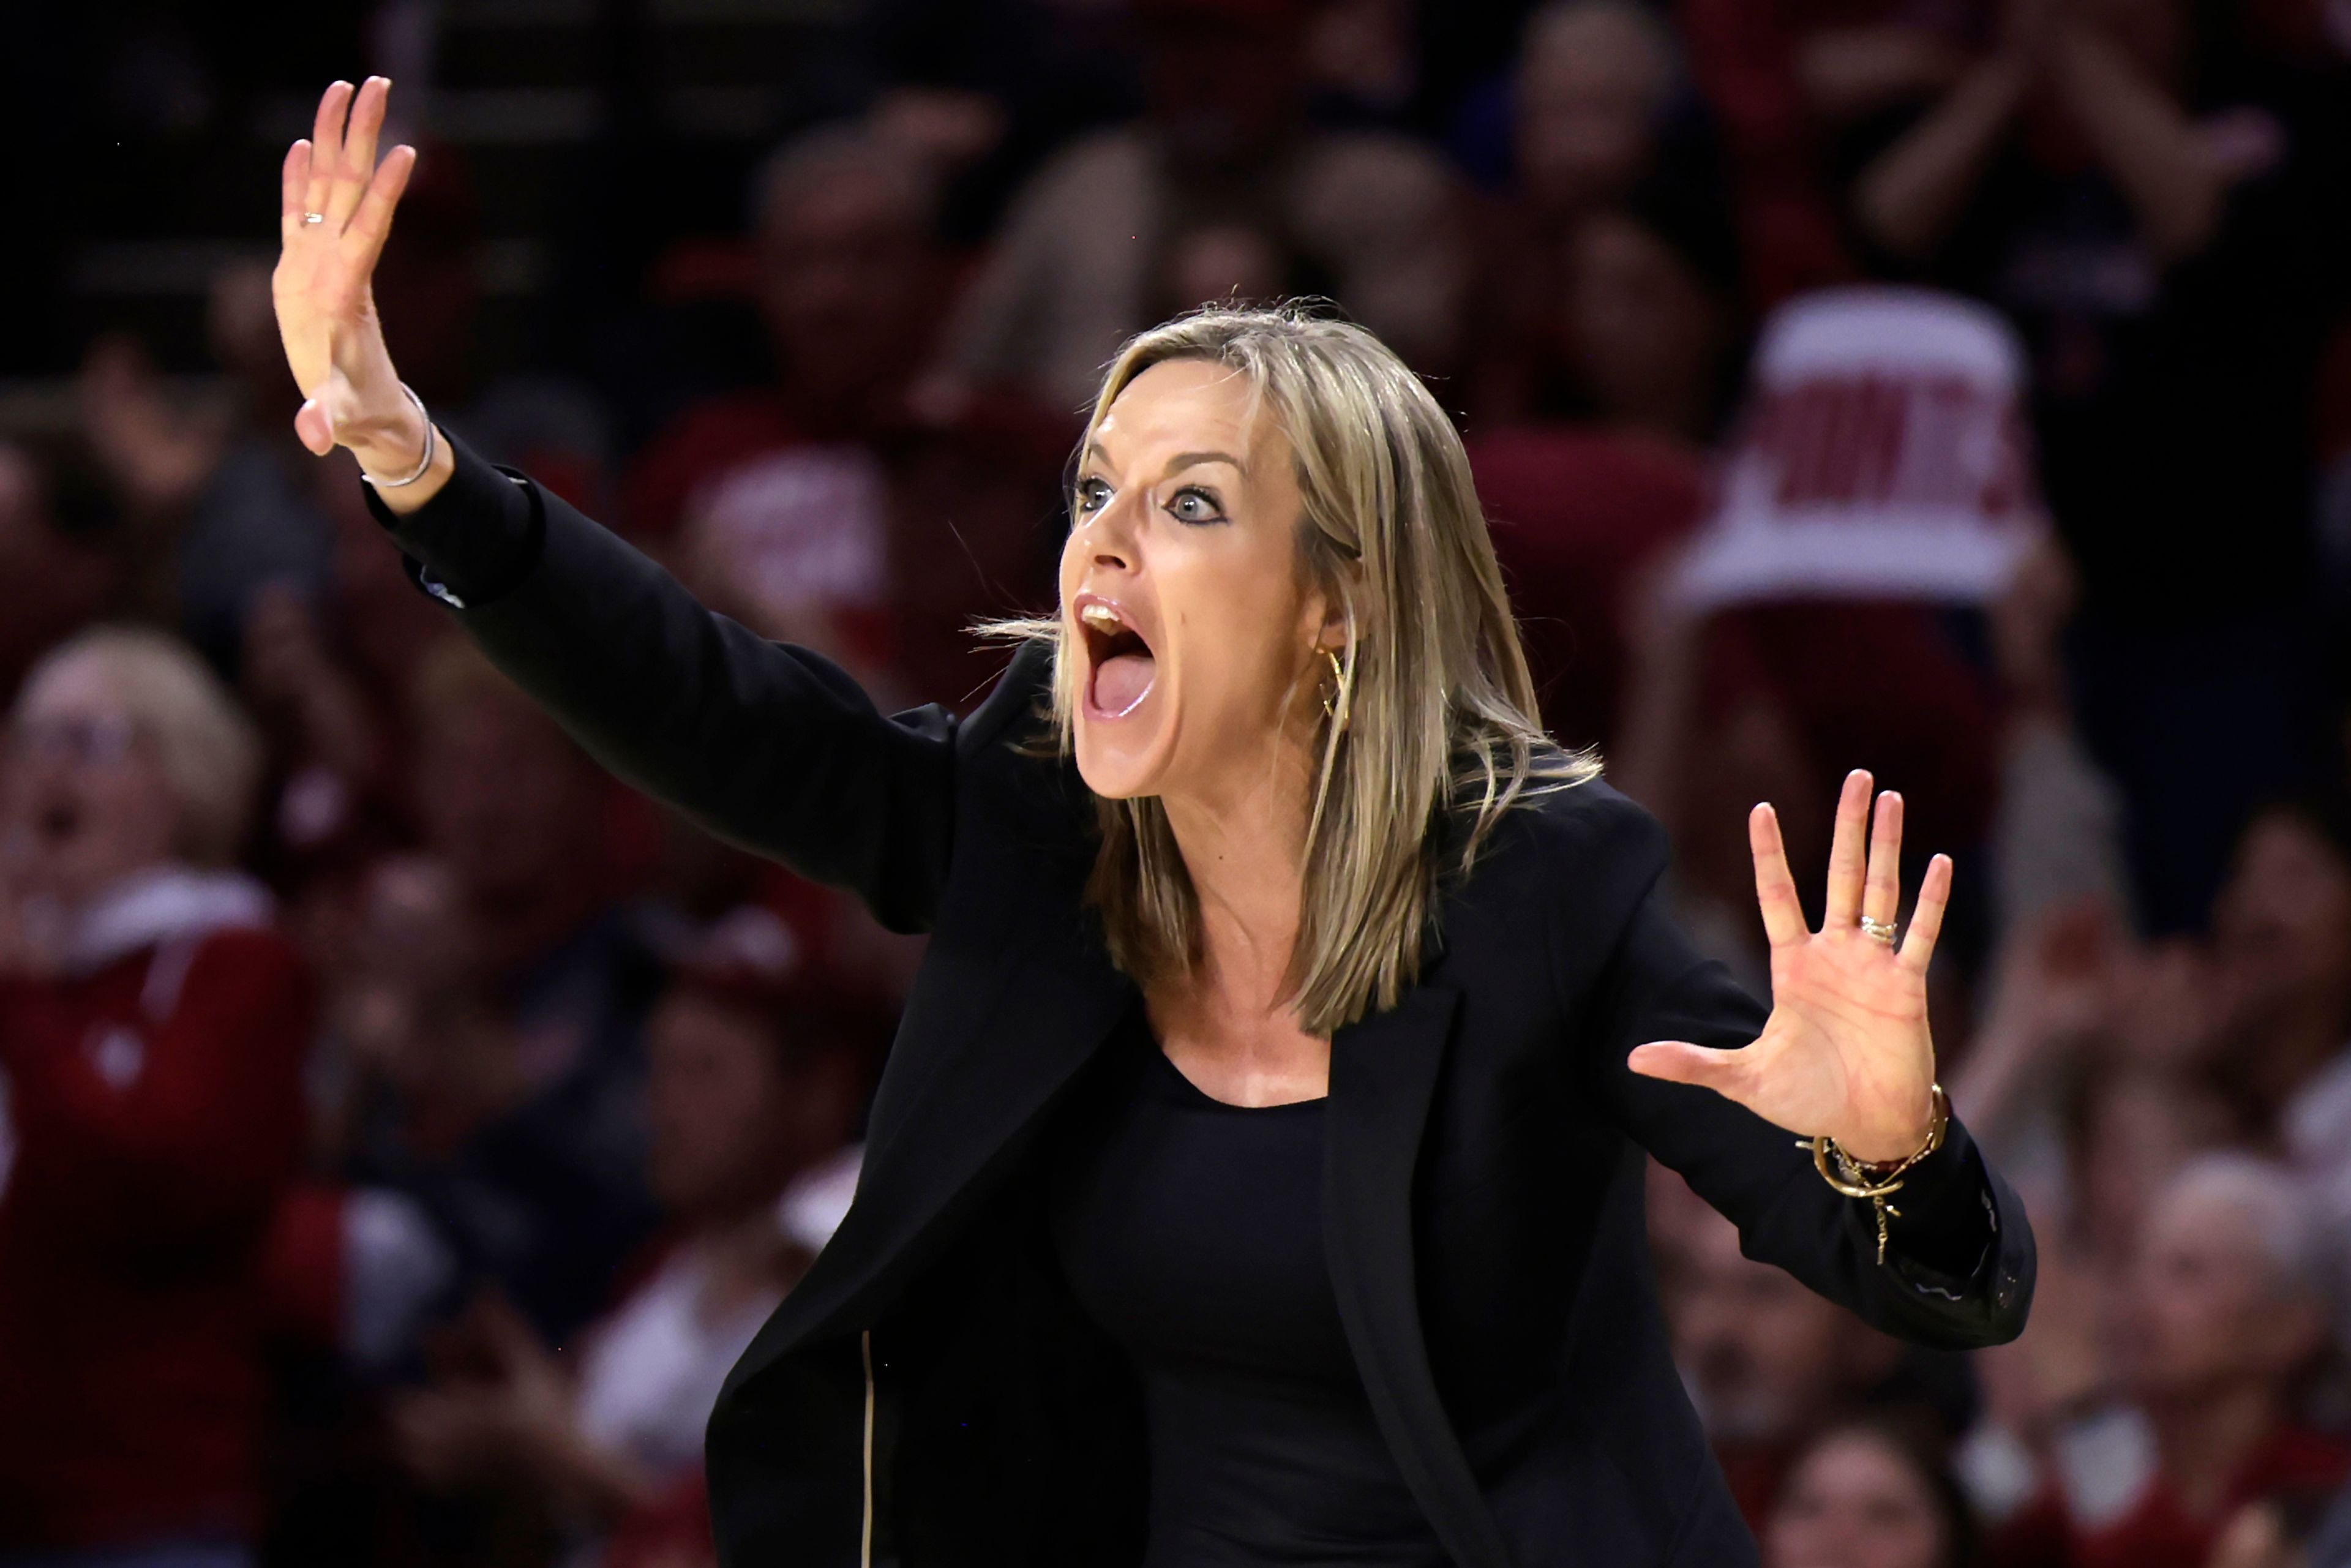 Oklahoma-Texas are top 2 seeds in final women's Big 12 Tournament before they depart for SEC